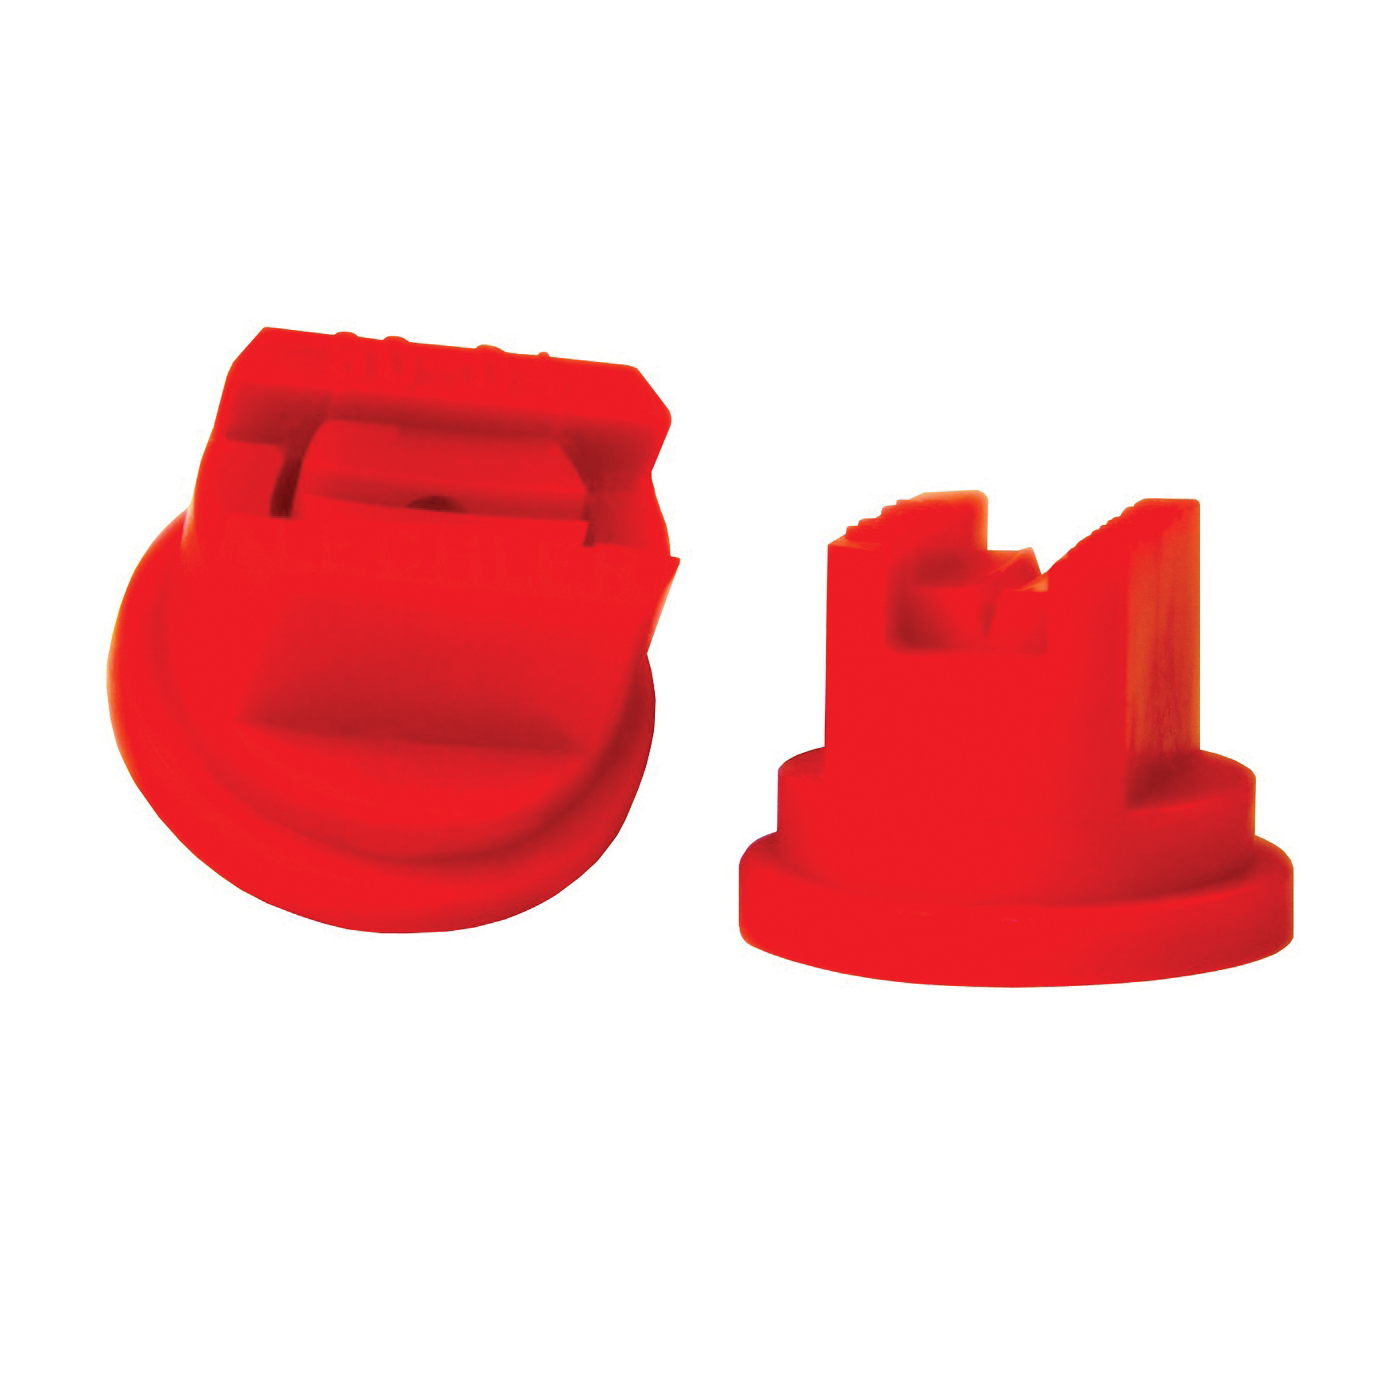 ST8004 Spray Nozzle, Standard Flat, Polyoxymethylene, Red, For: Y8253048 Series 8 mm Cap